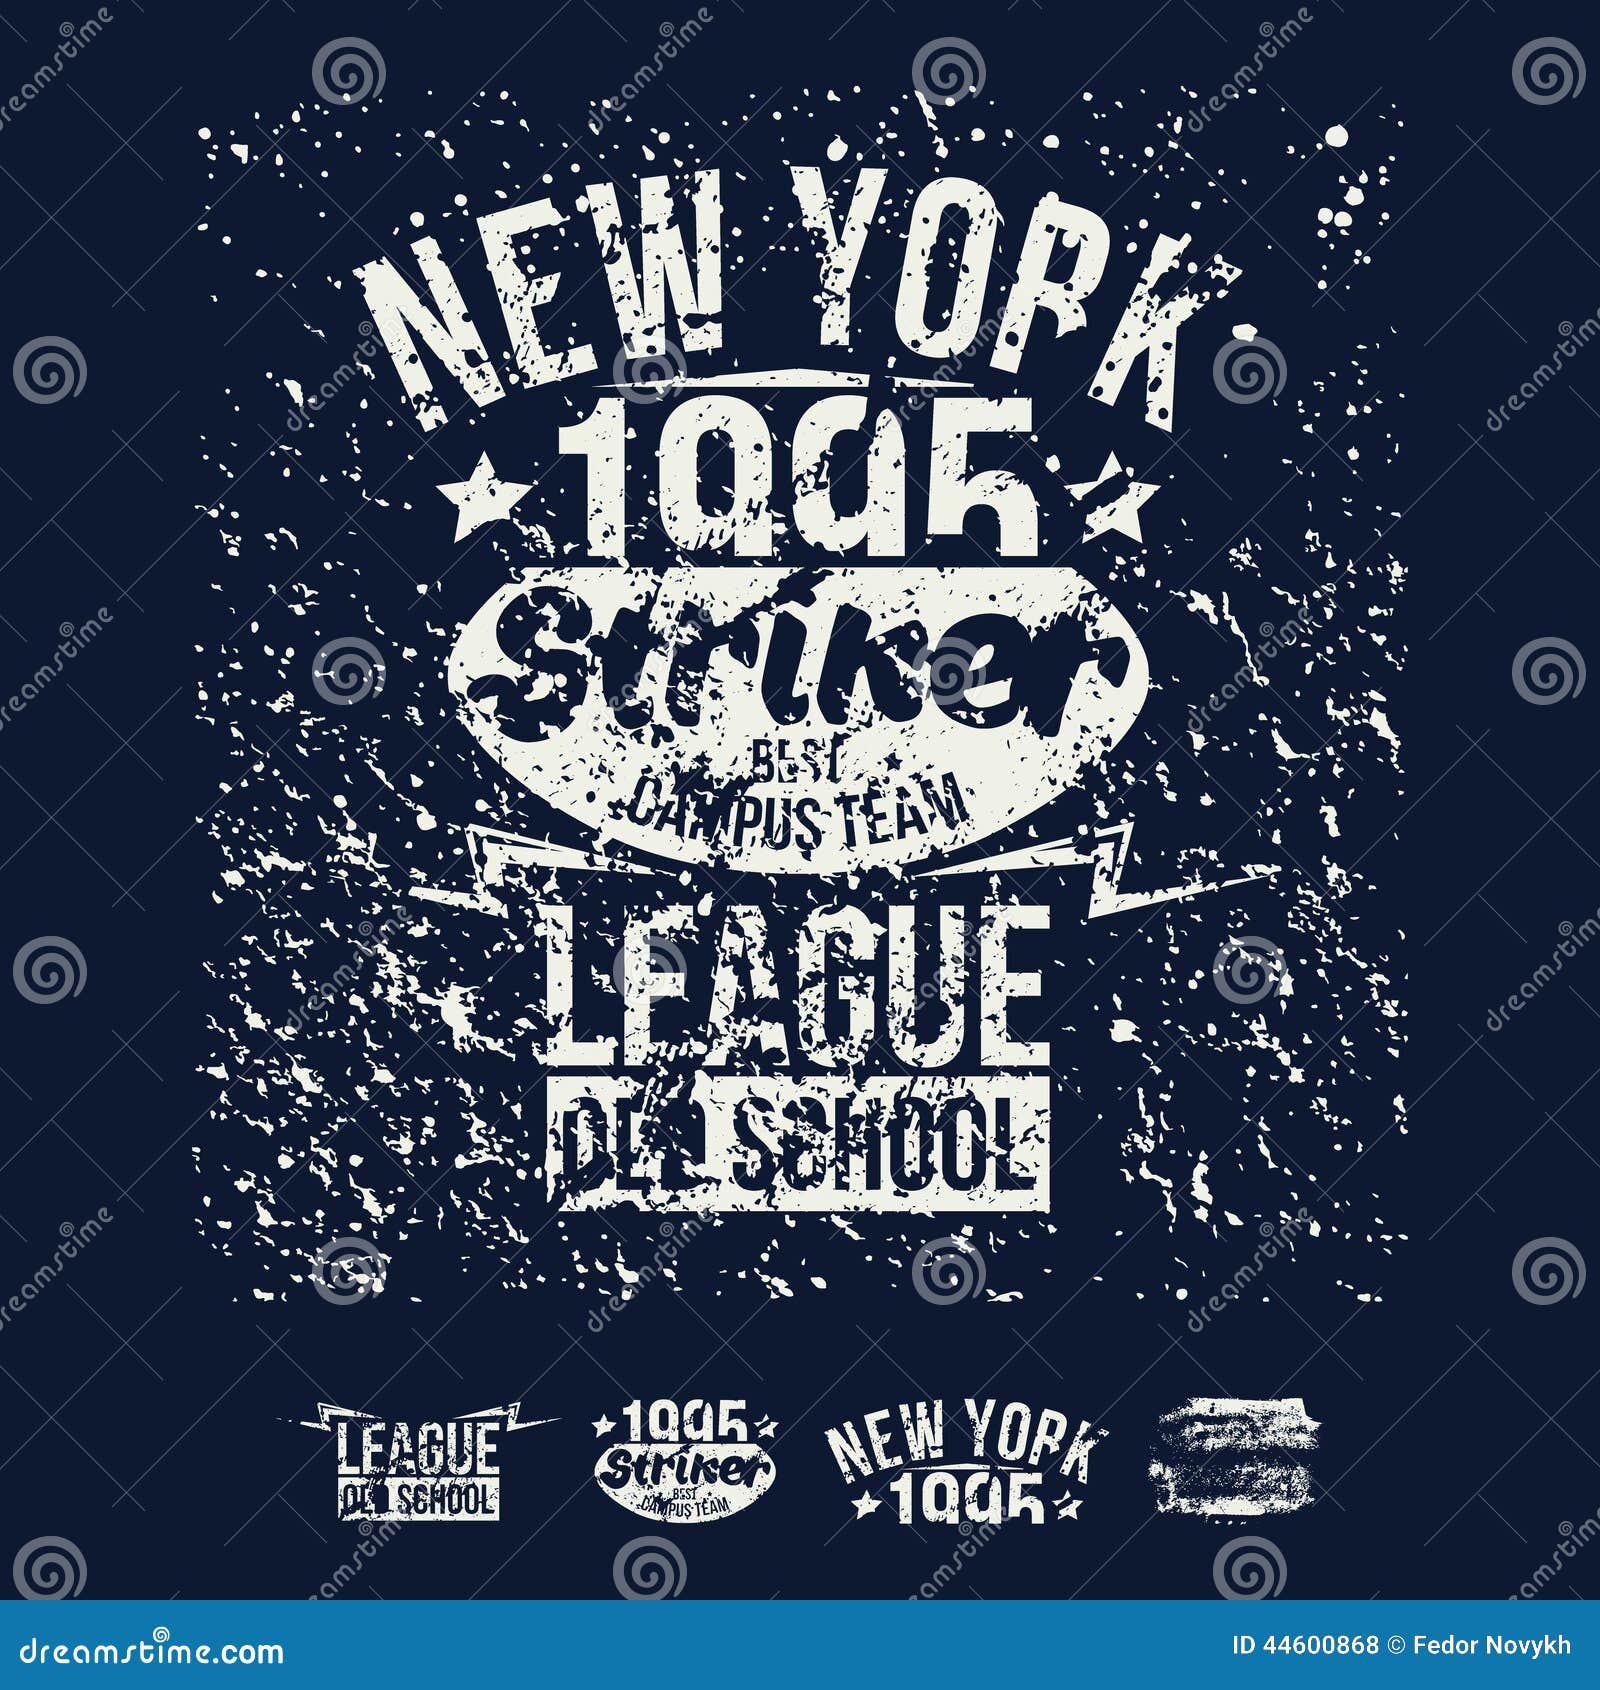 College New York Team Rugby Retro Emblem And Design Elements Stock ...